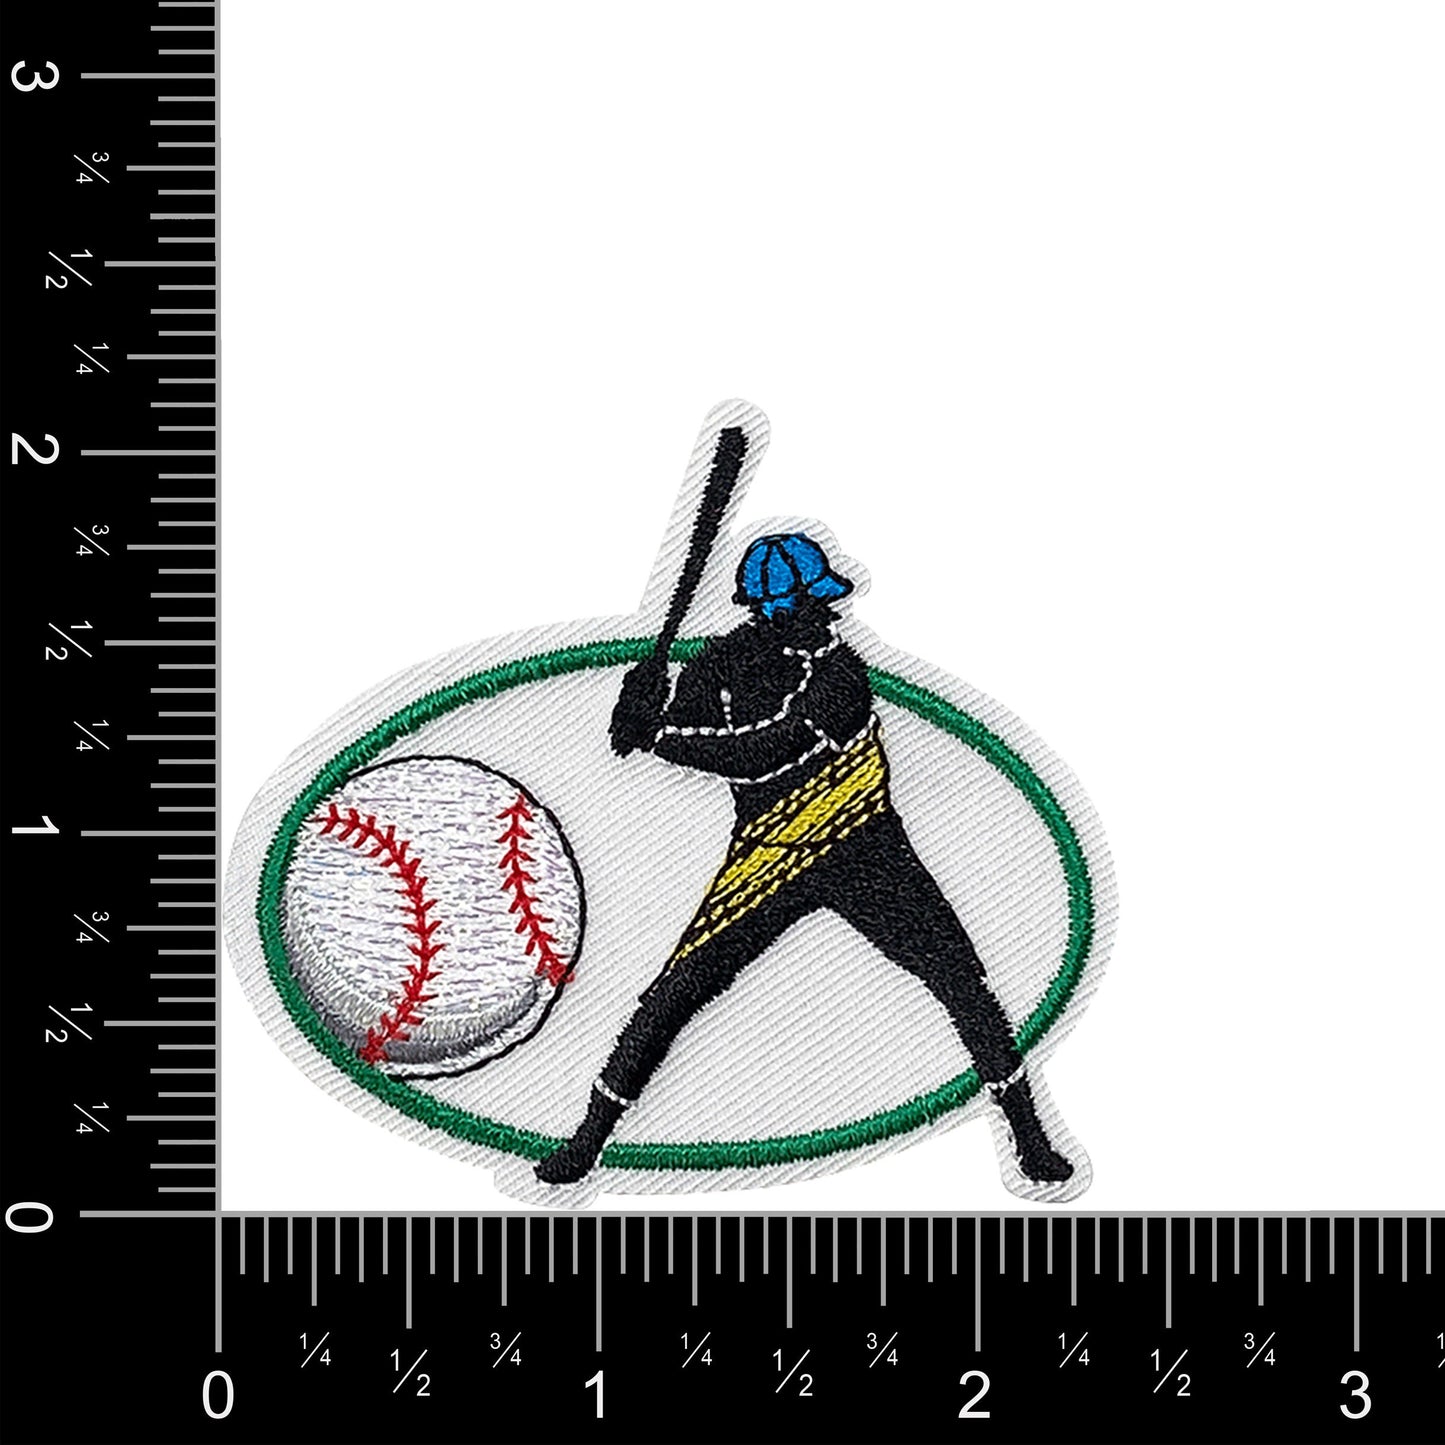 Competitive Baseball with Batter Embroidered Iron on Patch